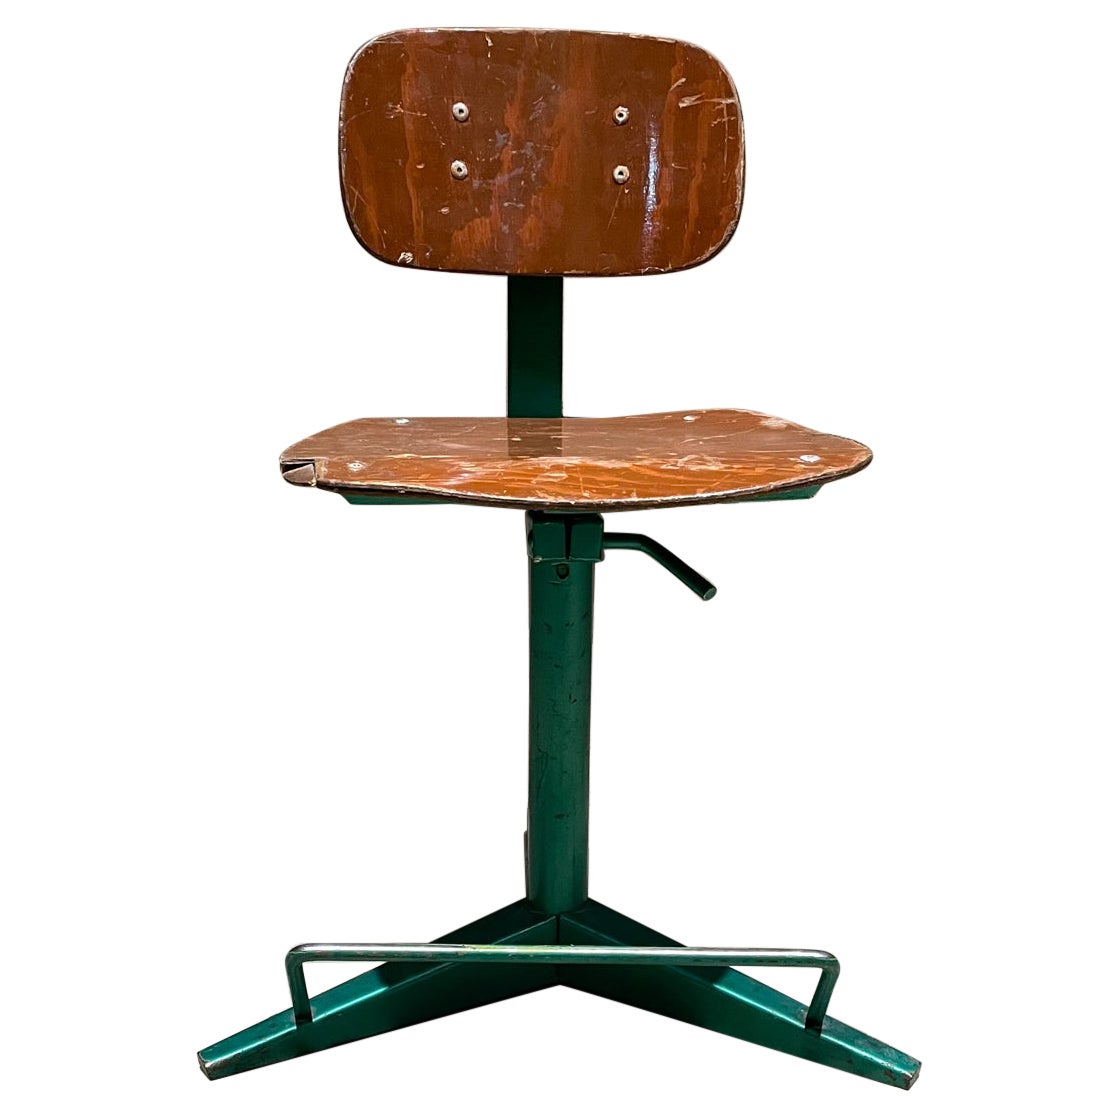 Fab French Prouve 1950s Style Green Office Chair Plywood Tripod Base + Footrest